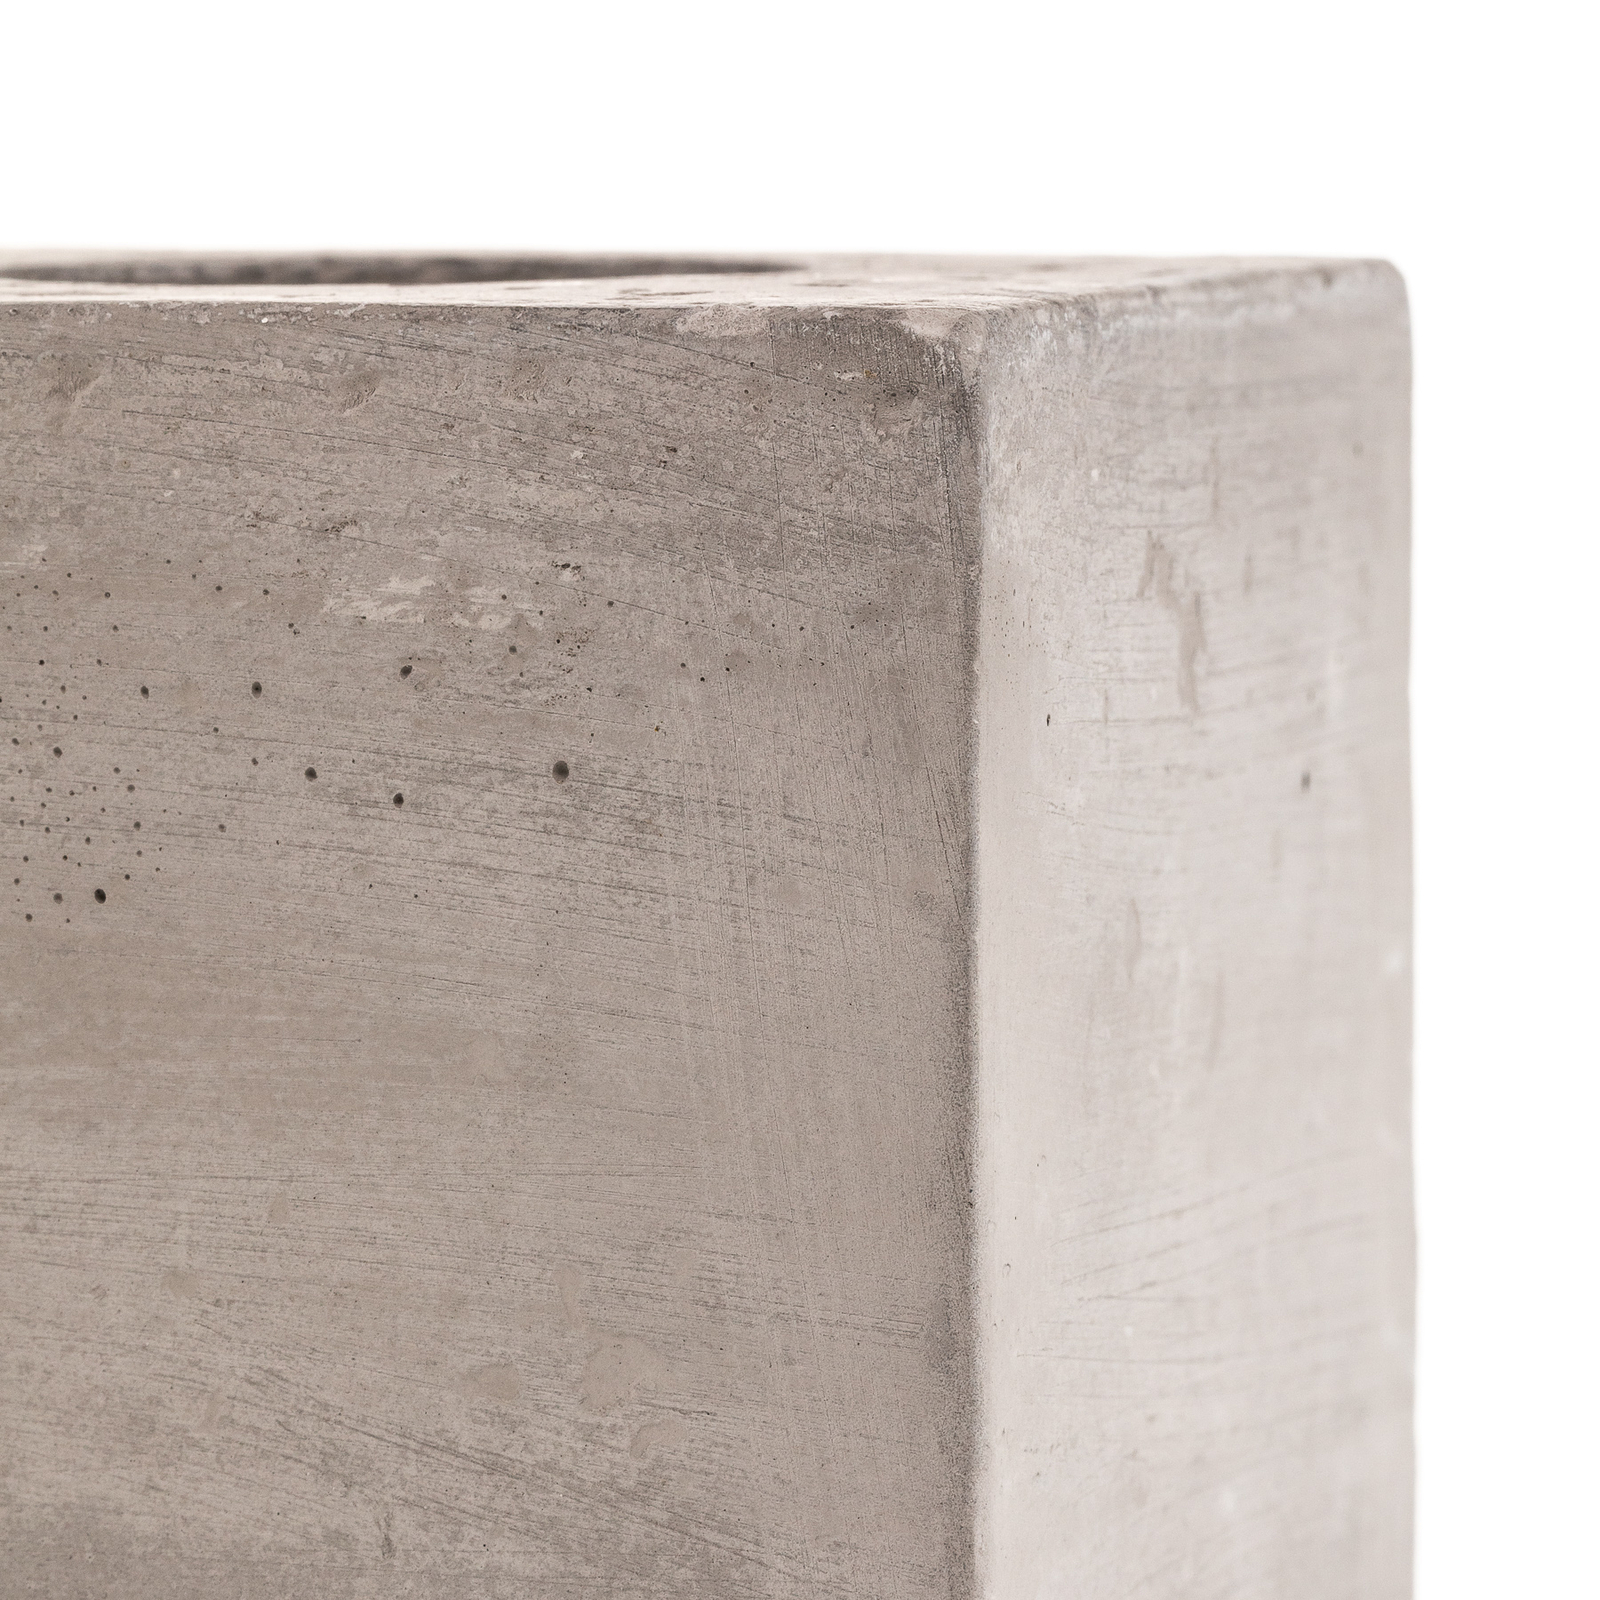 Akira table lamp made of concrete in cube shape